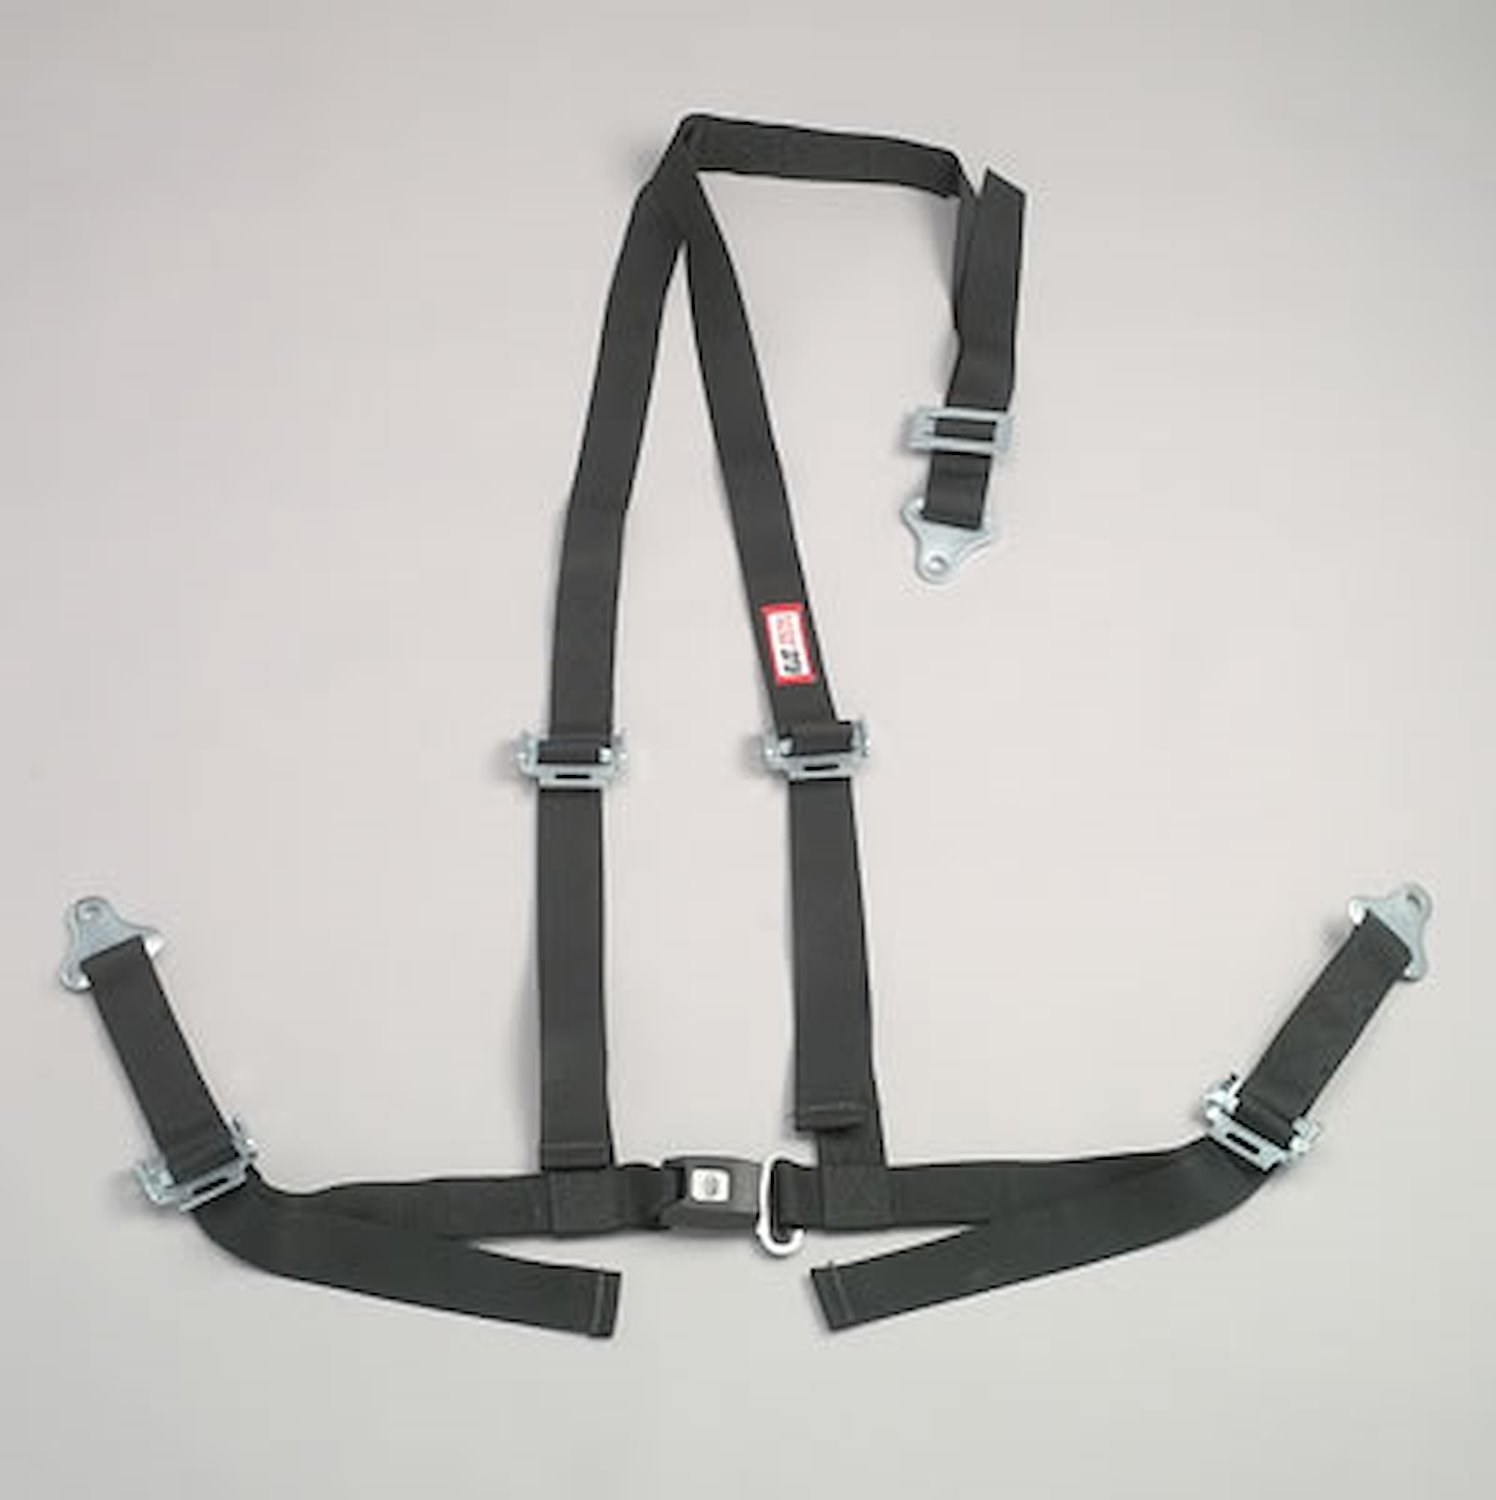 NON-SFI B&T HARNESS 2 PULL UP Lap Belt 2 S. H. Y FLOOR Mount ALL WRAP ENDS GRAY